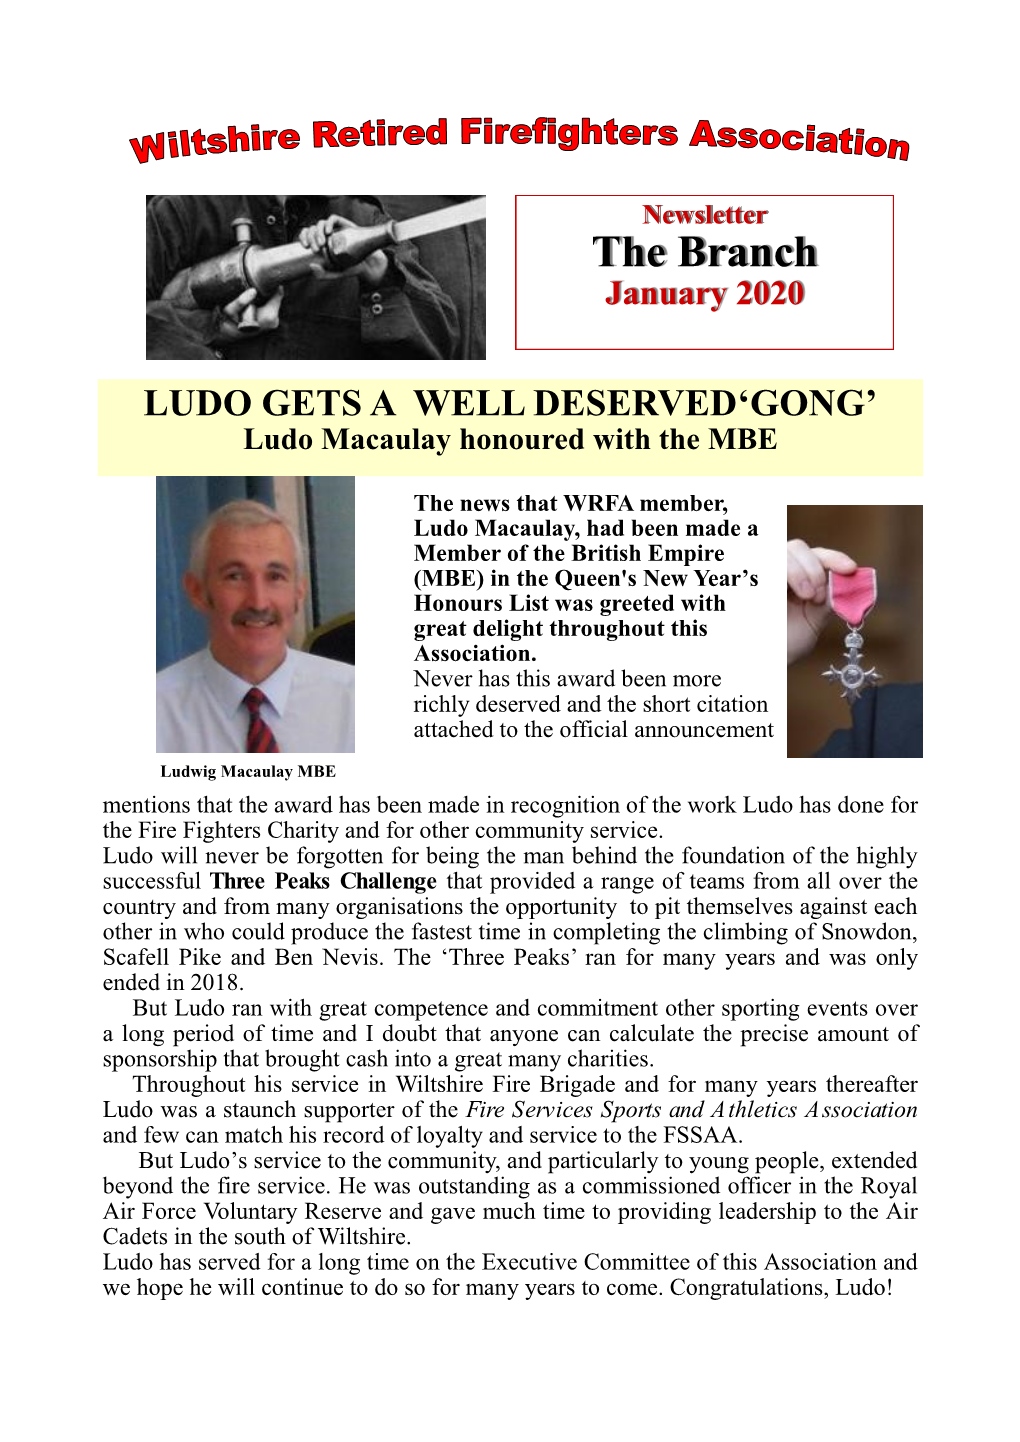 The Branch January 2020